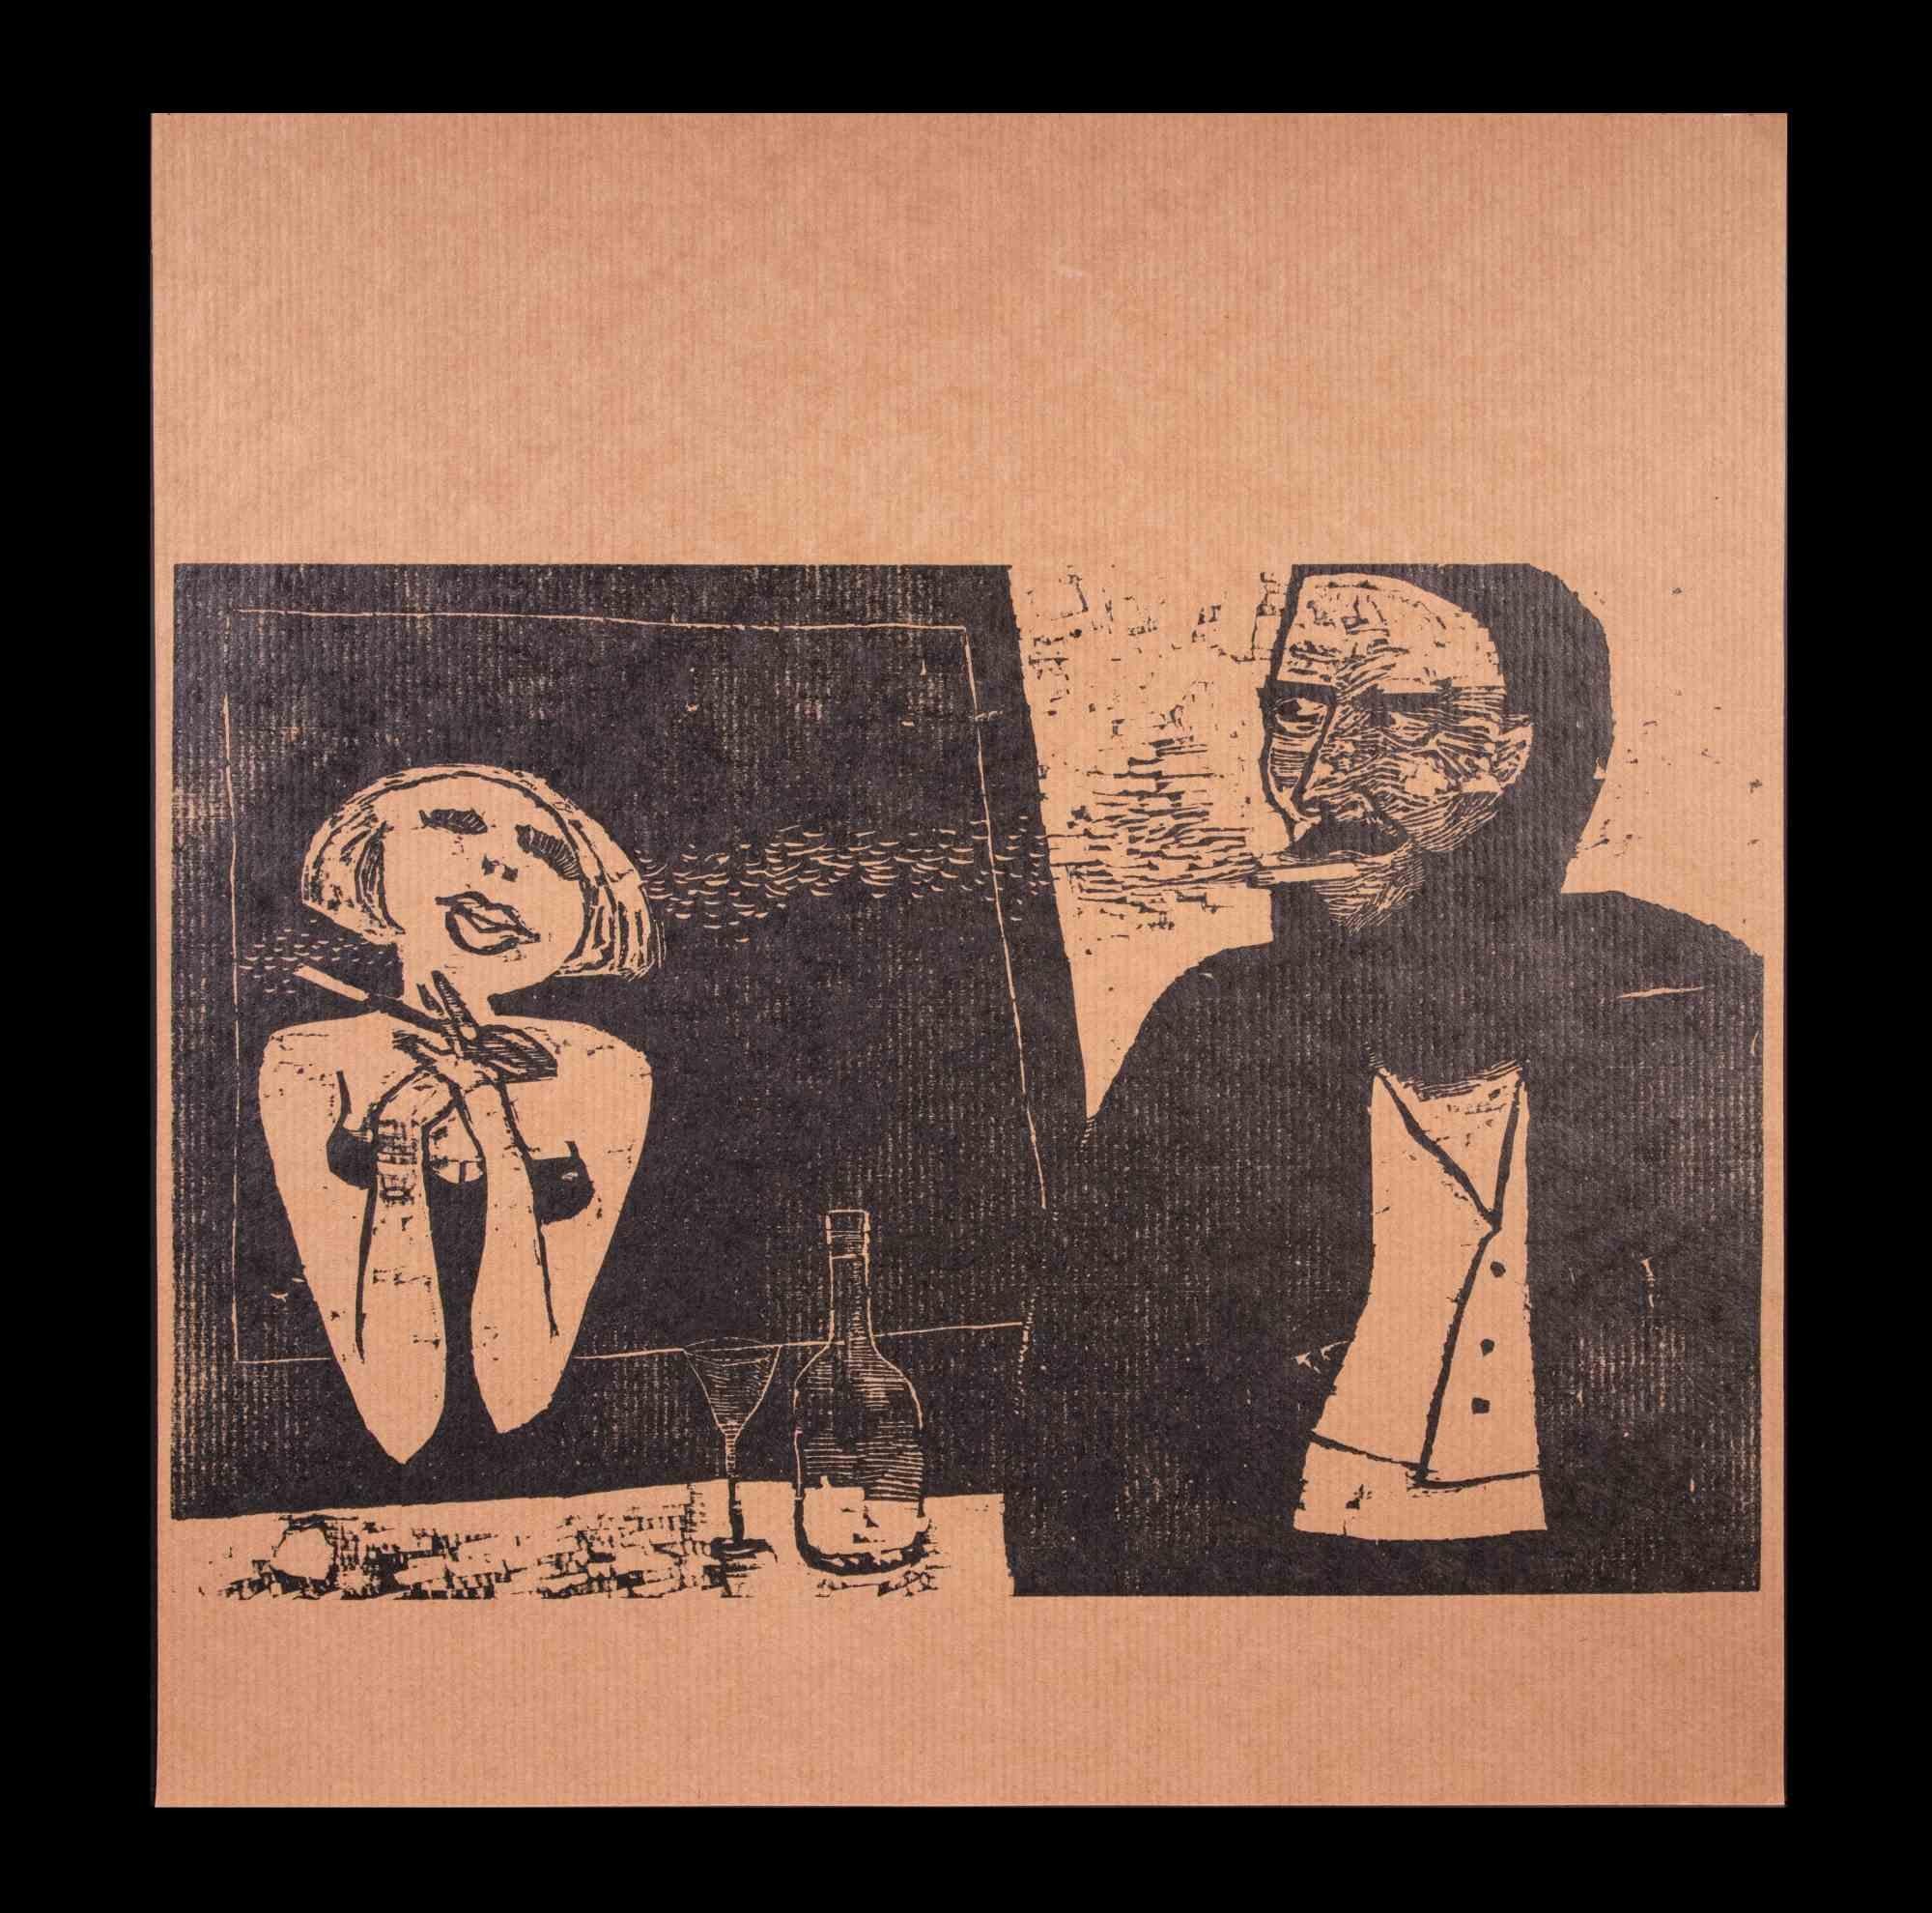 Unknown Figurative Print - A Man and a Woman - Original Woodcut print  - Early 20th Century